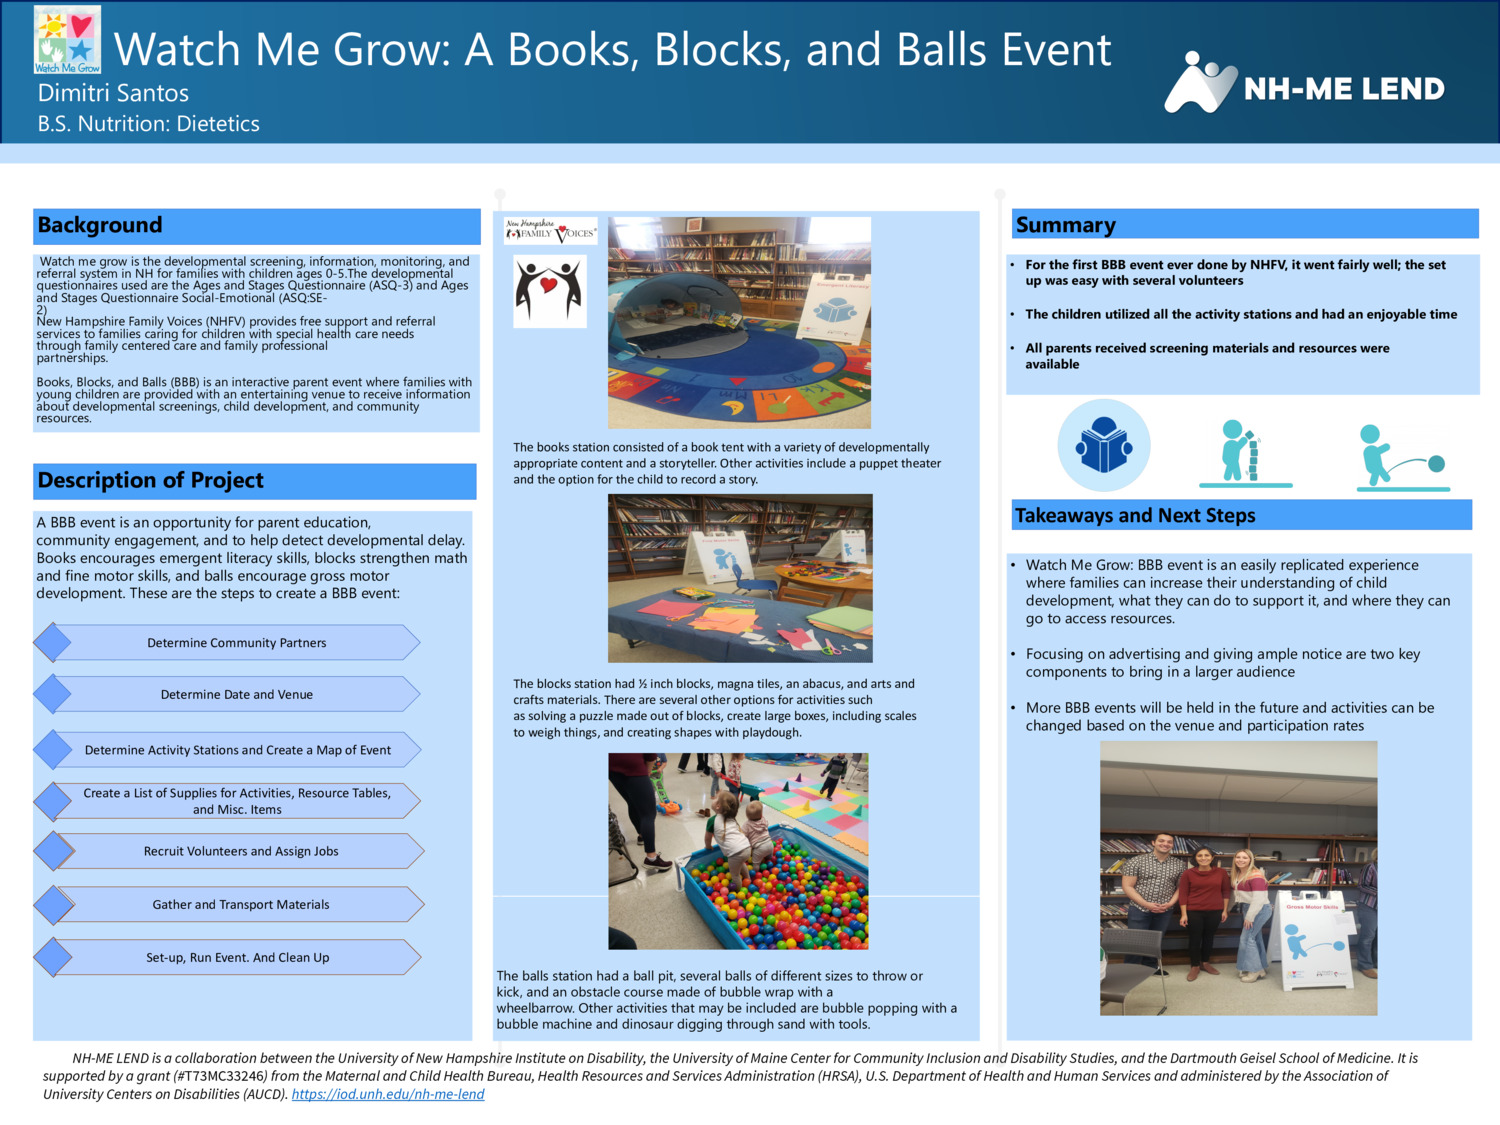 Watch Me Grow: A Books, Blocks, And Balls Event by Des1036